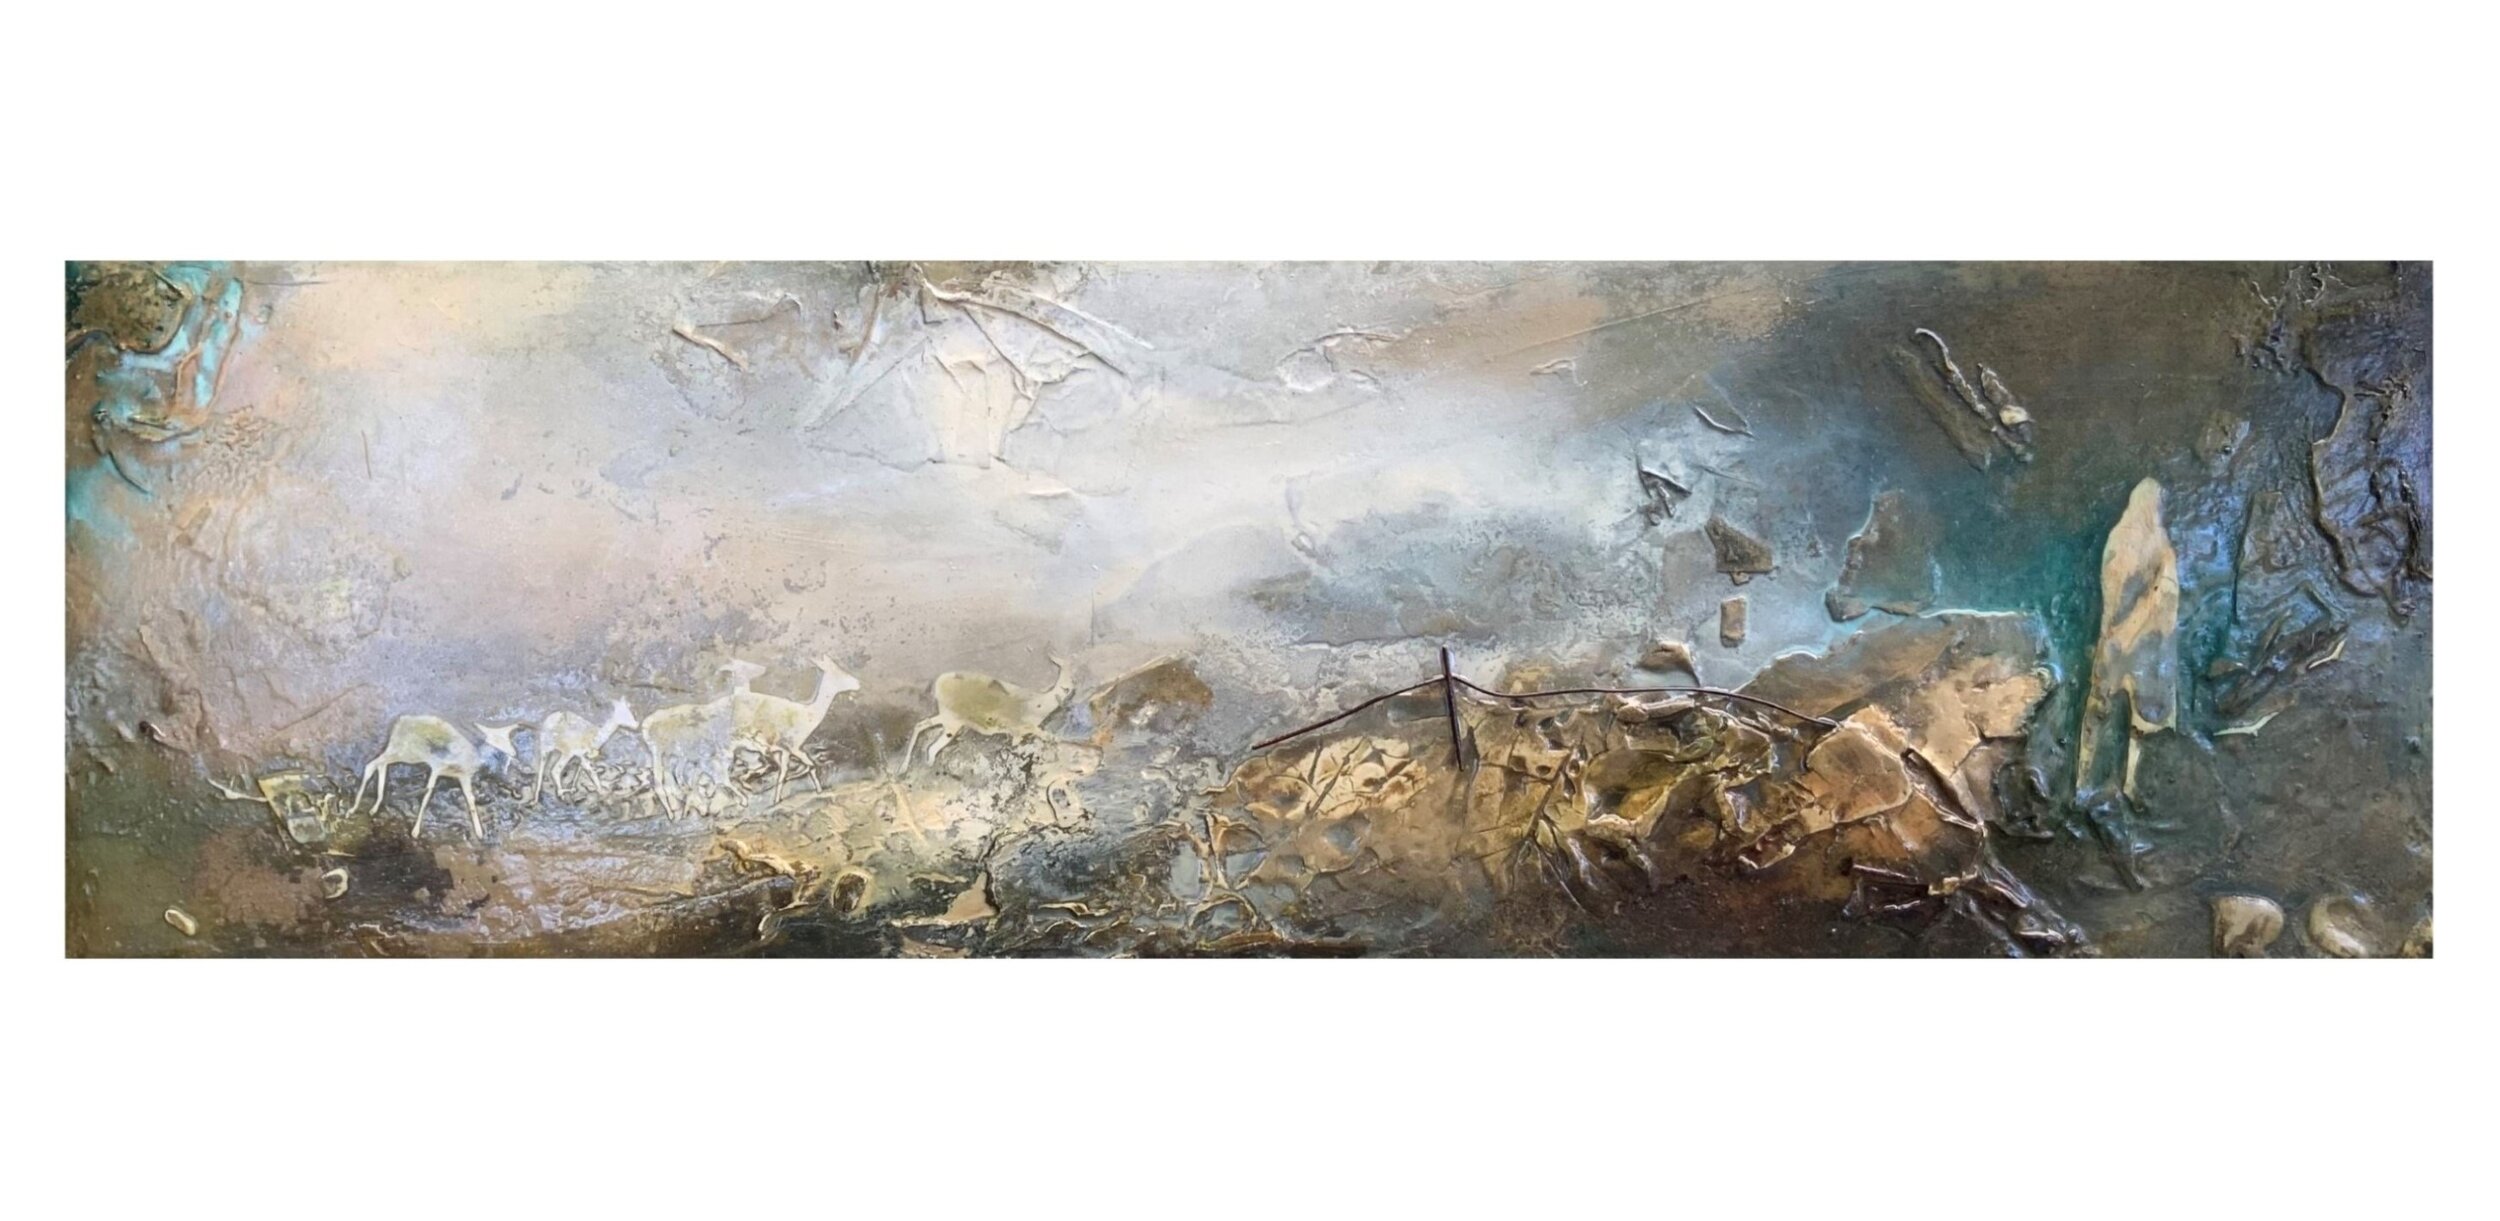 While Shepherds Watch - Mixed Media on Board - 30x100cm